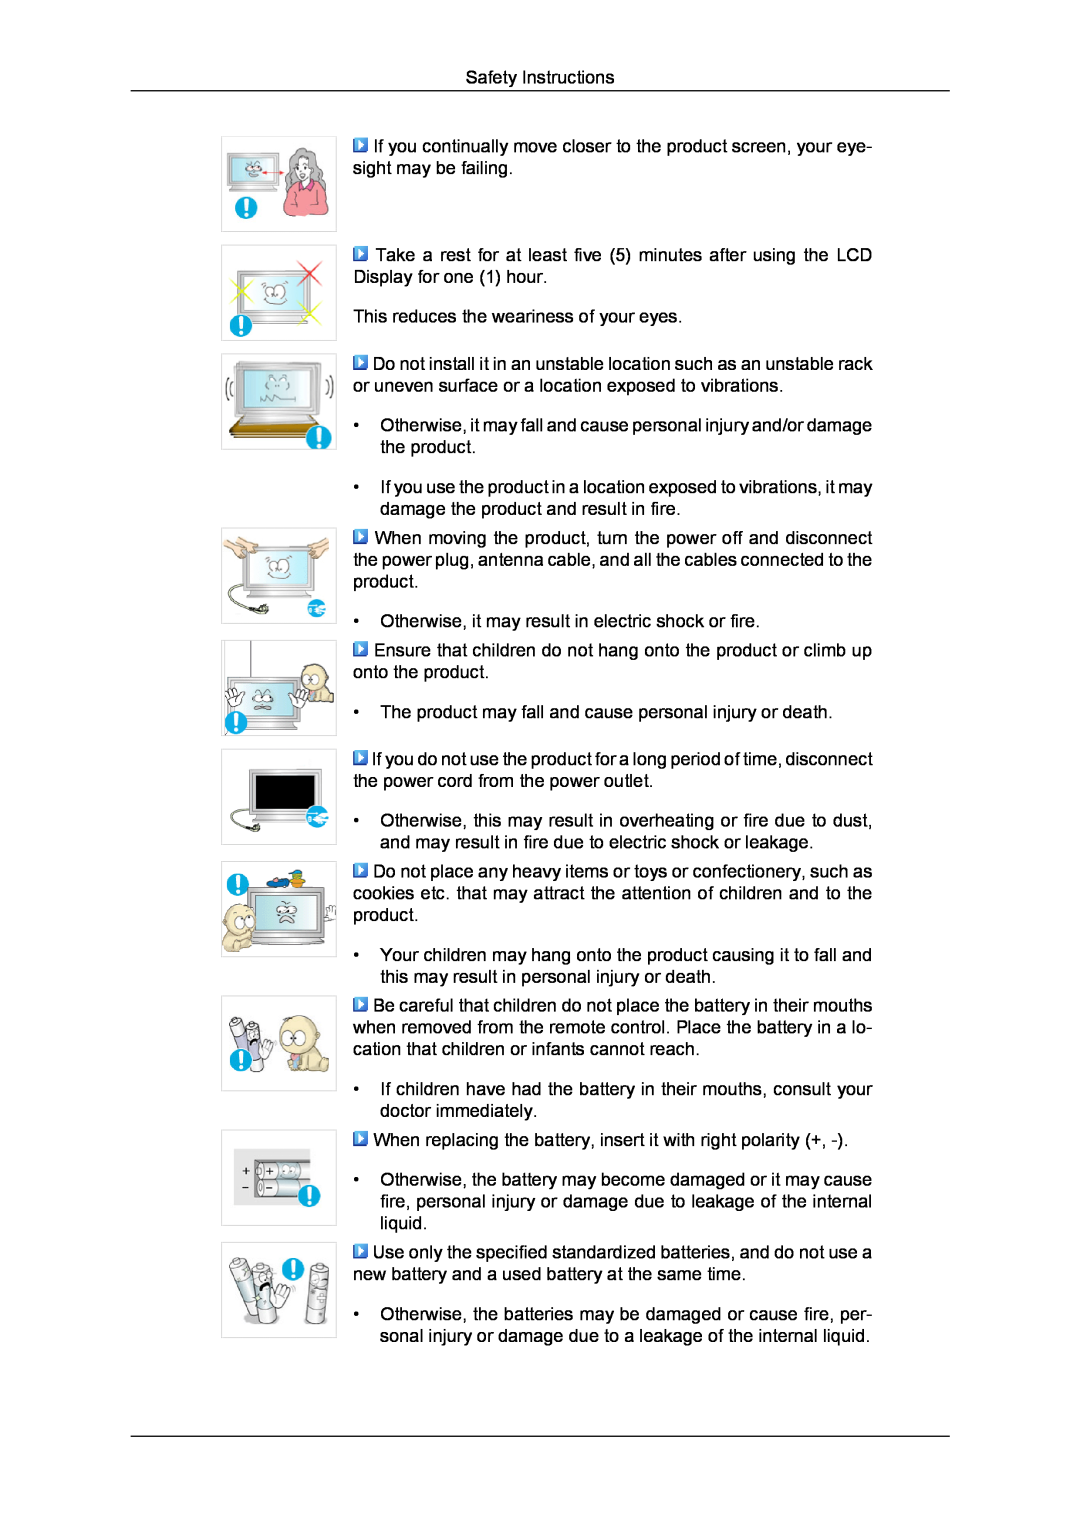 Samsung LH46MGULBC/EN, LH40MGUMBC/EN, LH46MGUMBC/EN manual Safety Instructions, This reduces the weariness of your eyes 